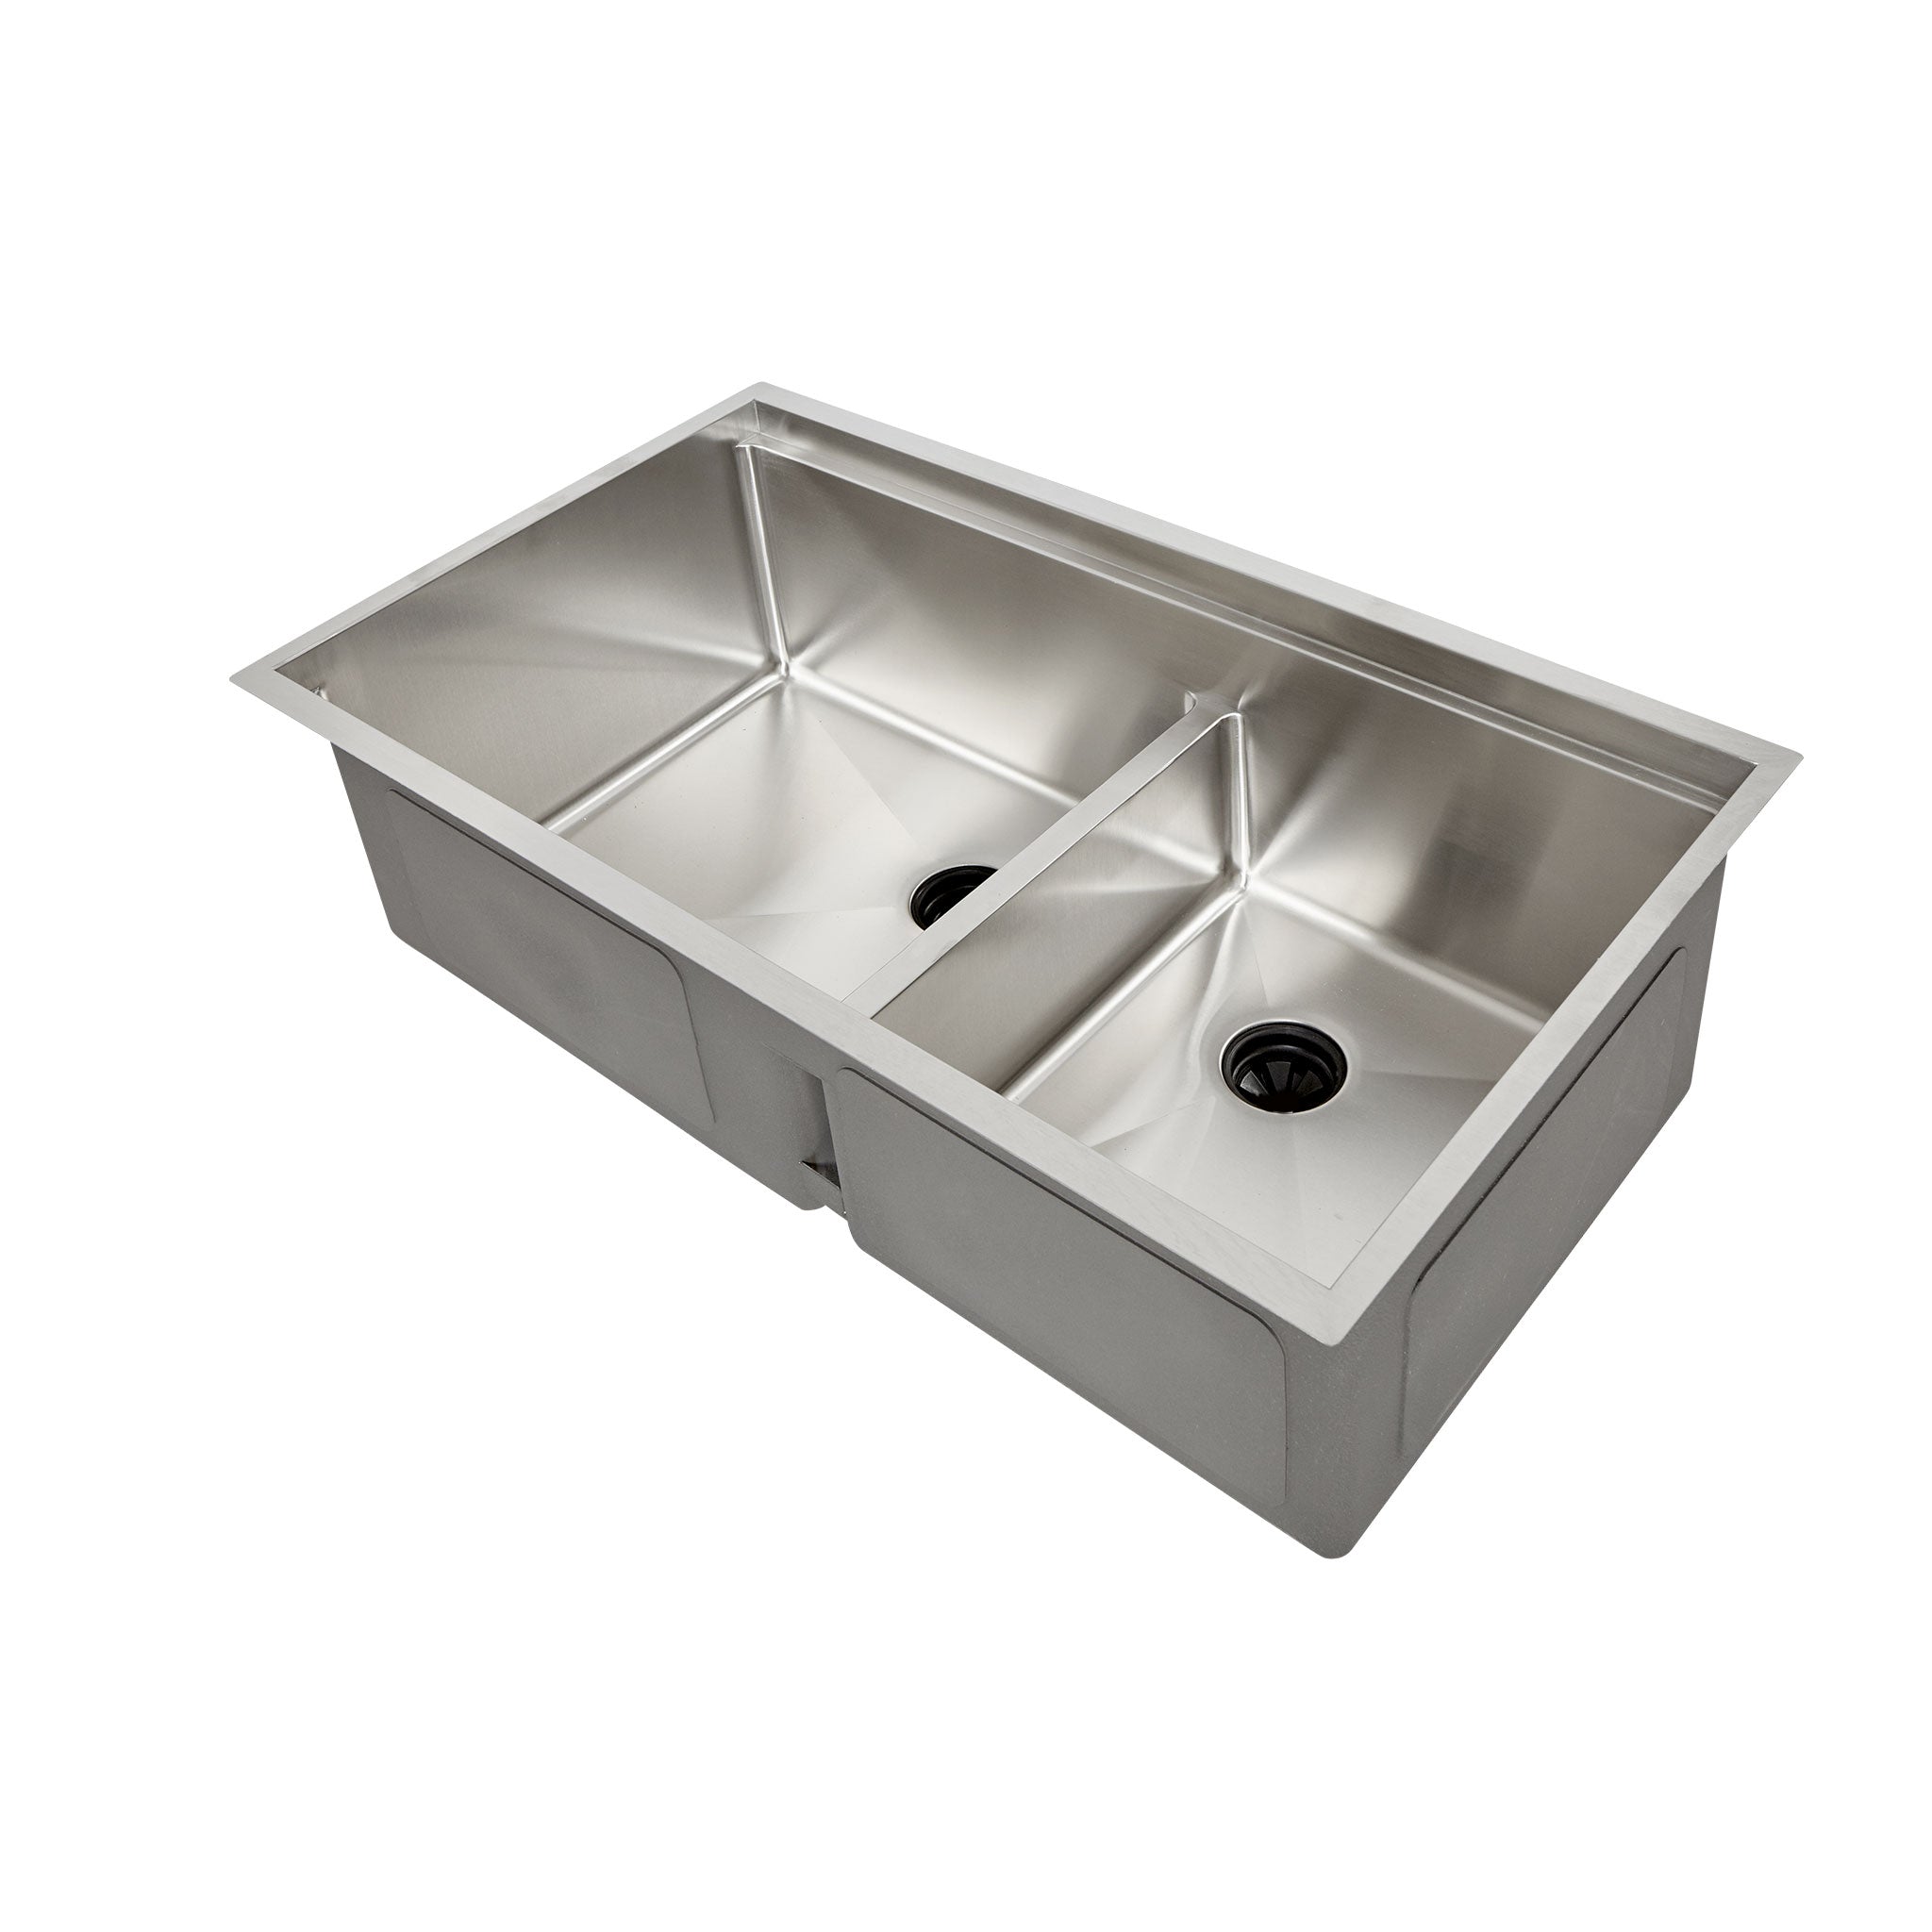 34" double bowl workstation sink with a low divide